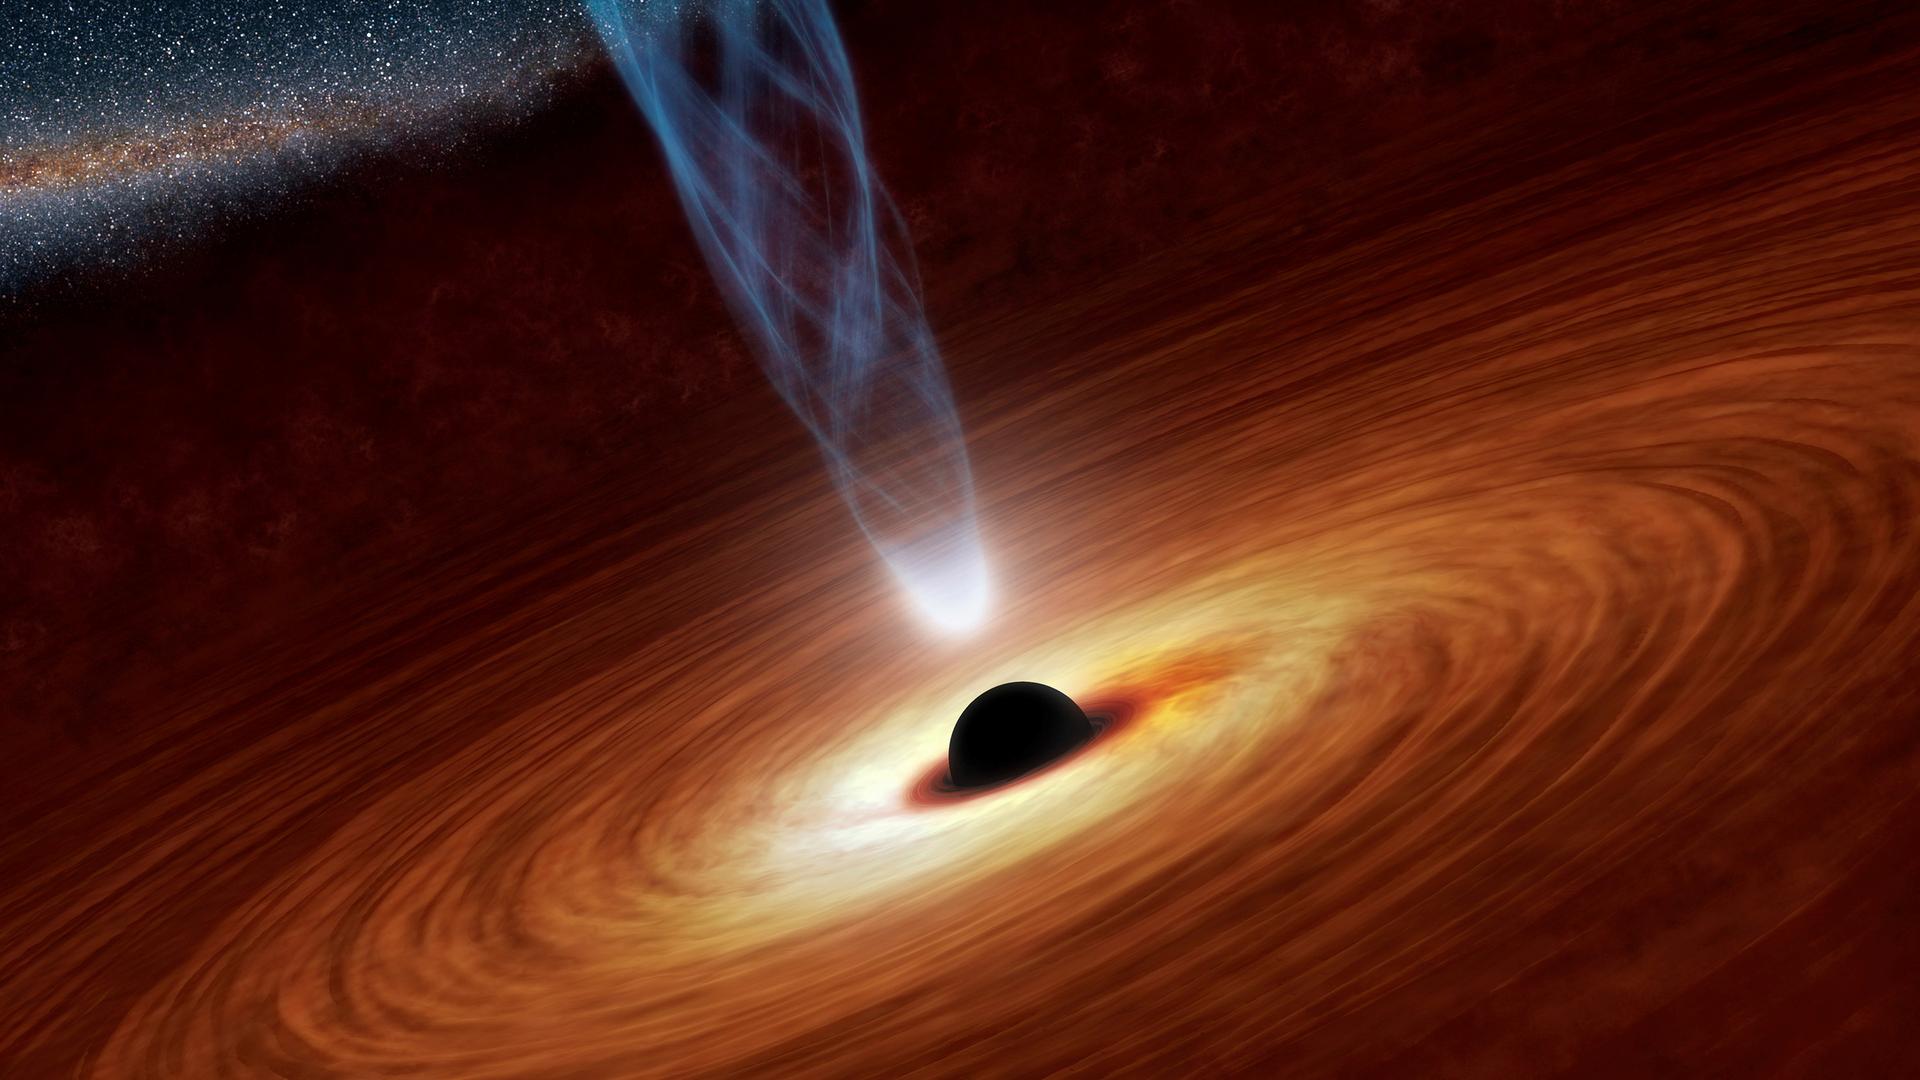 In astrophysics milestone, first photo of black hole expected